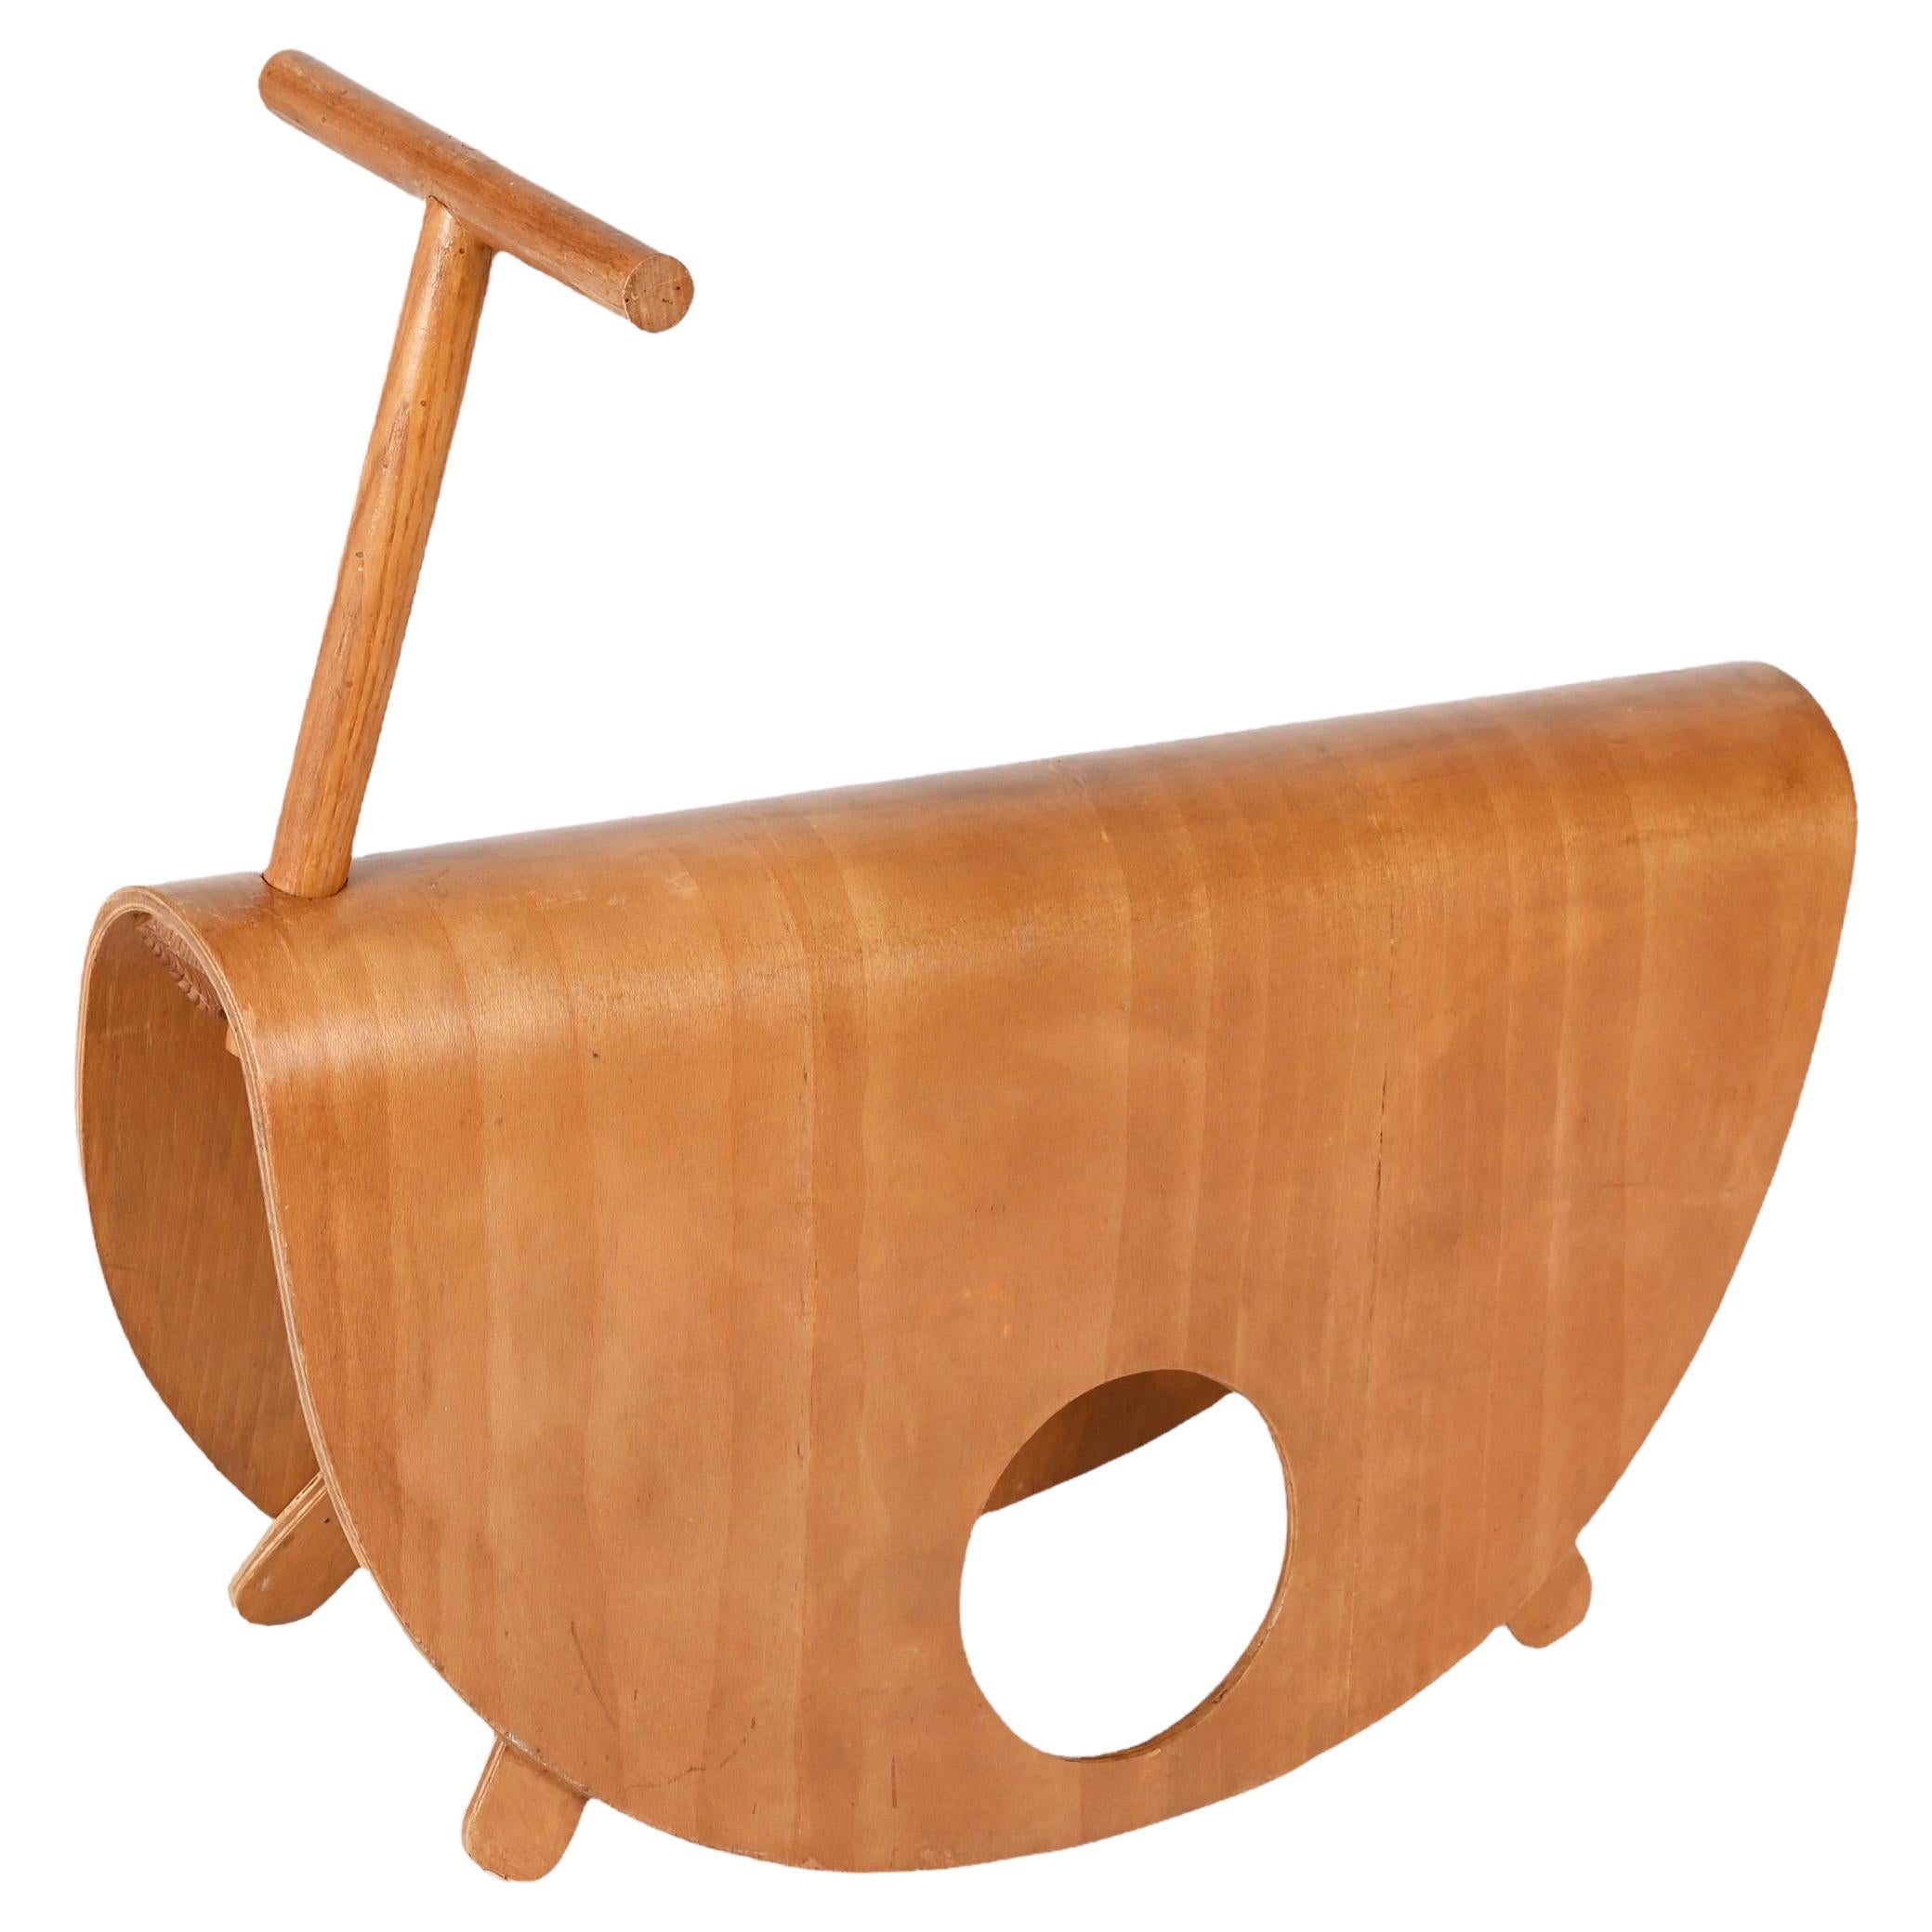 Di Giuli Peppe "Astolfo" Curved Plywood Italian Children Rocking Chair, 1979 For Sale